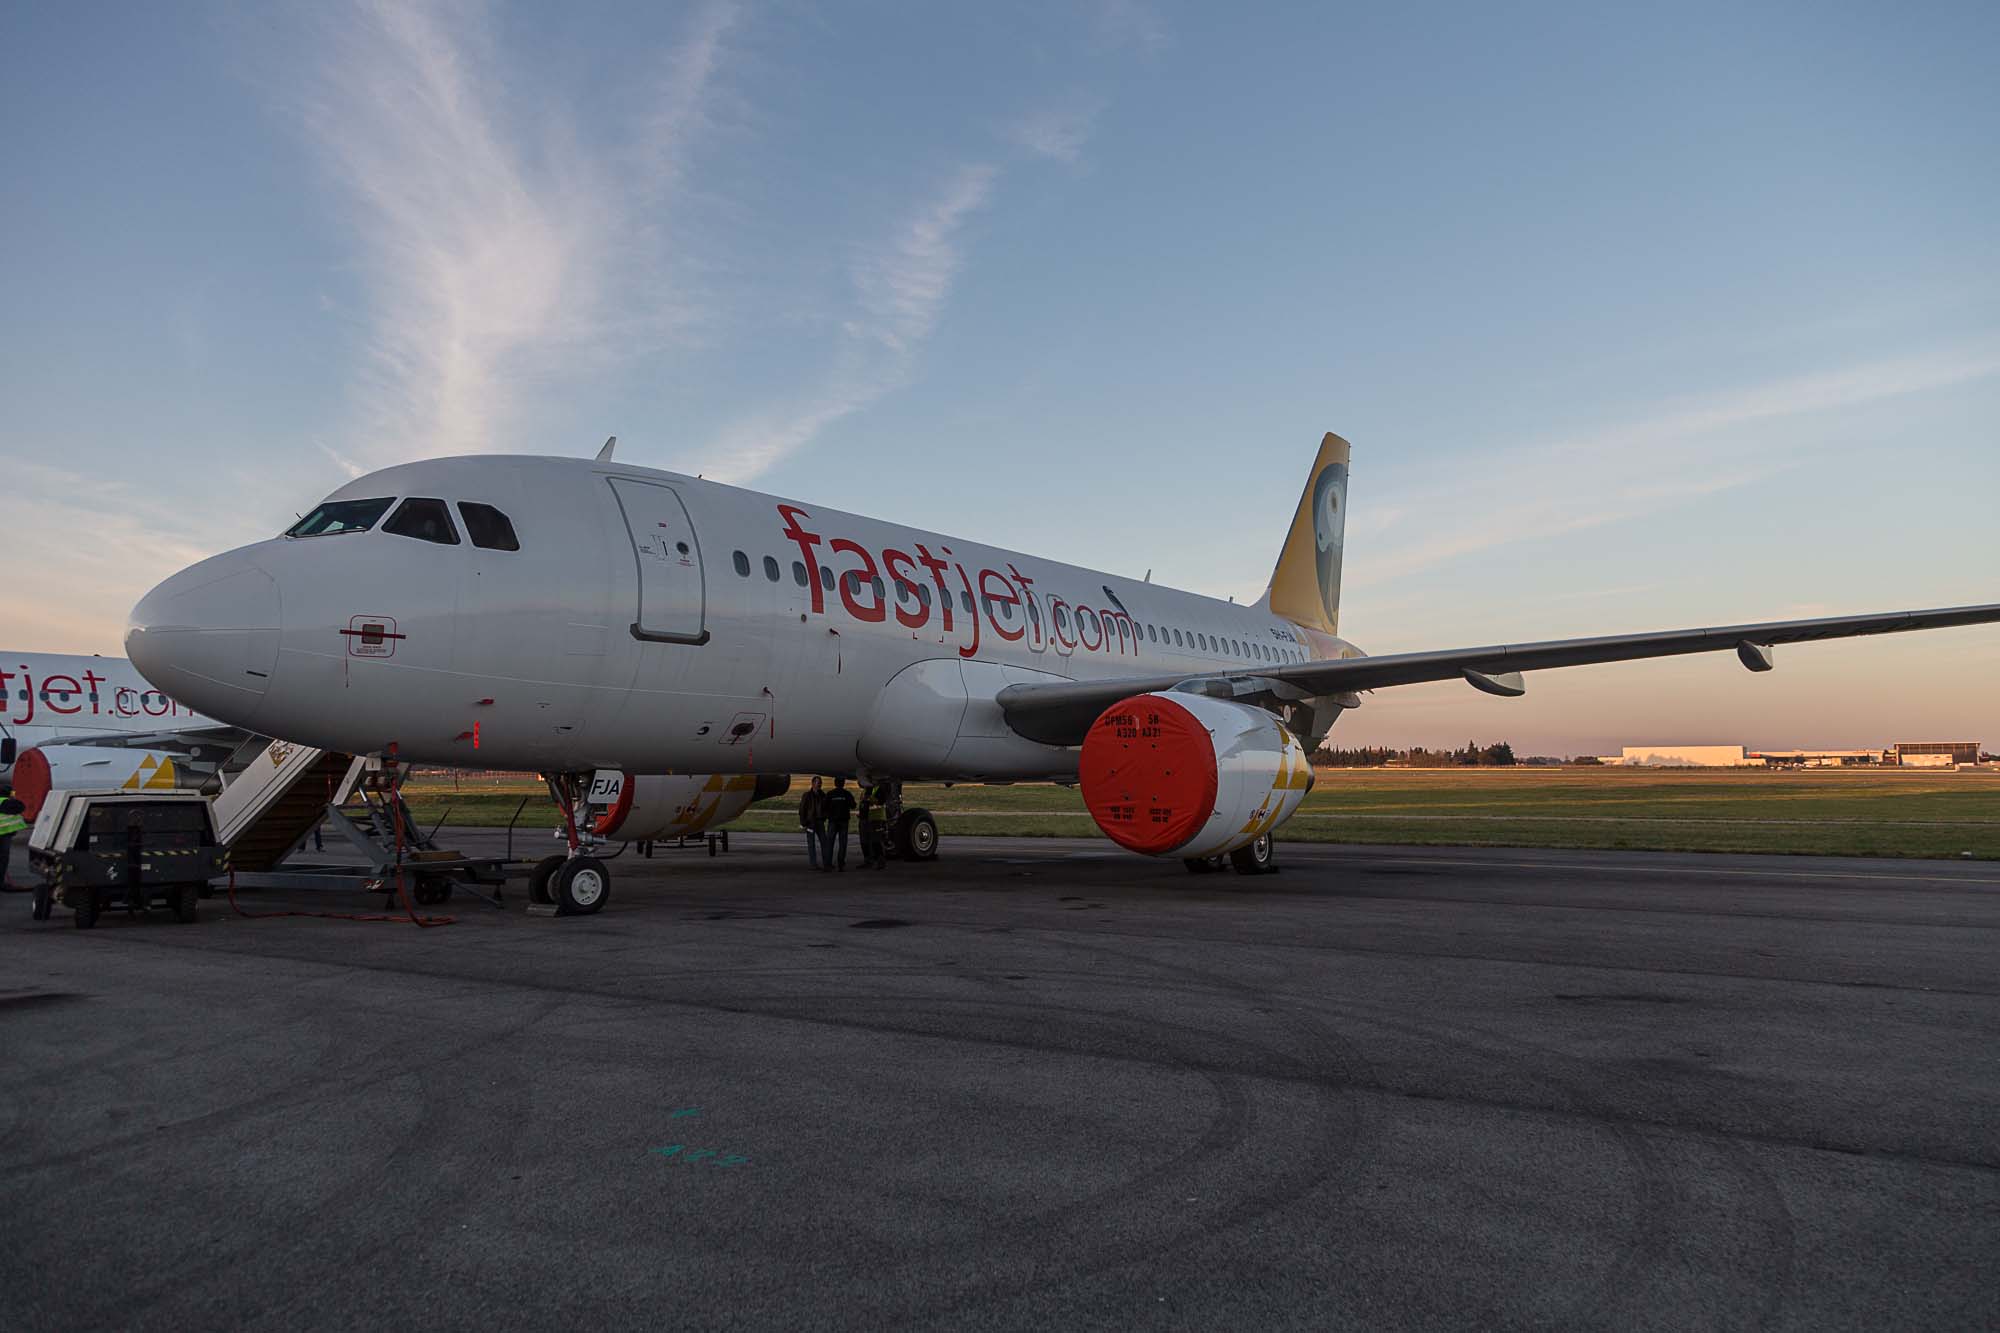 Fastjet adds two new domestic destinations